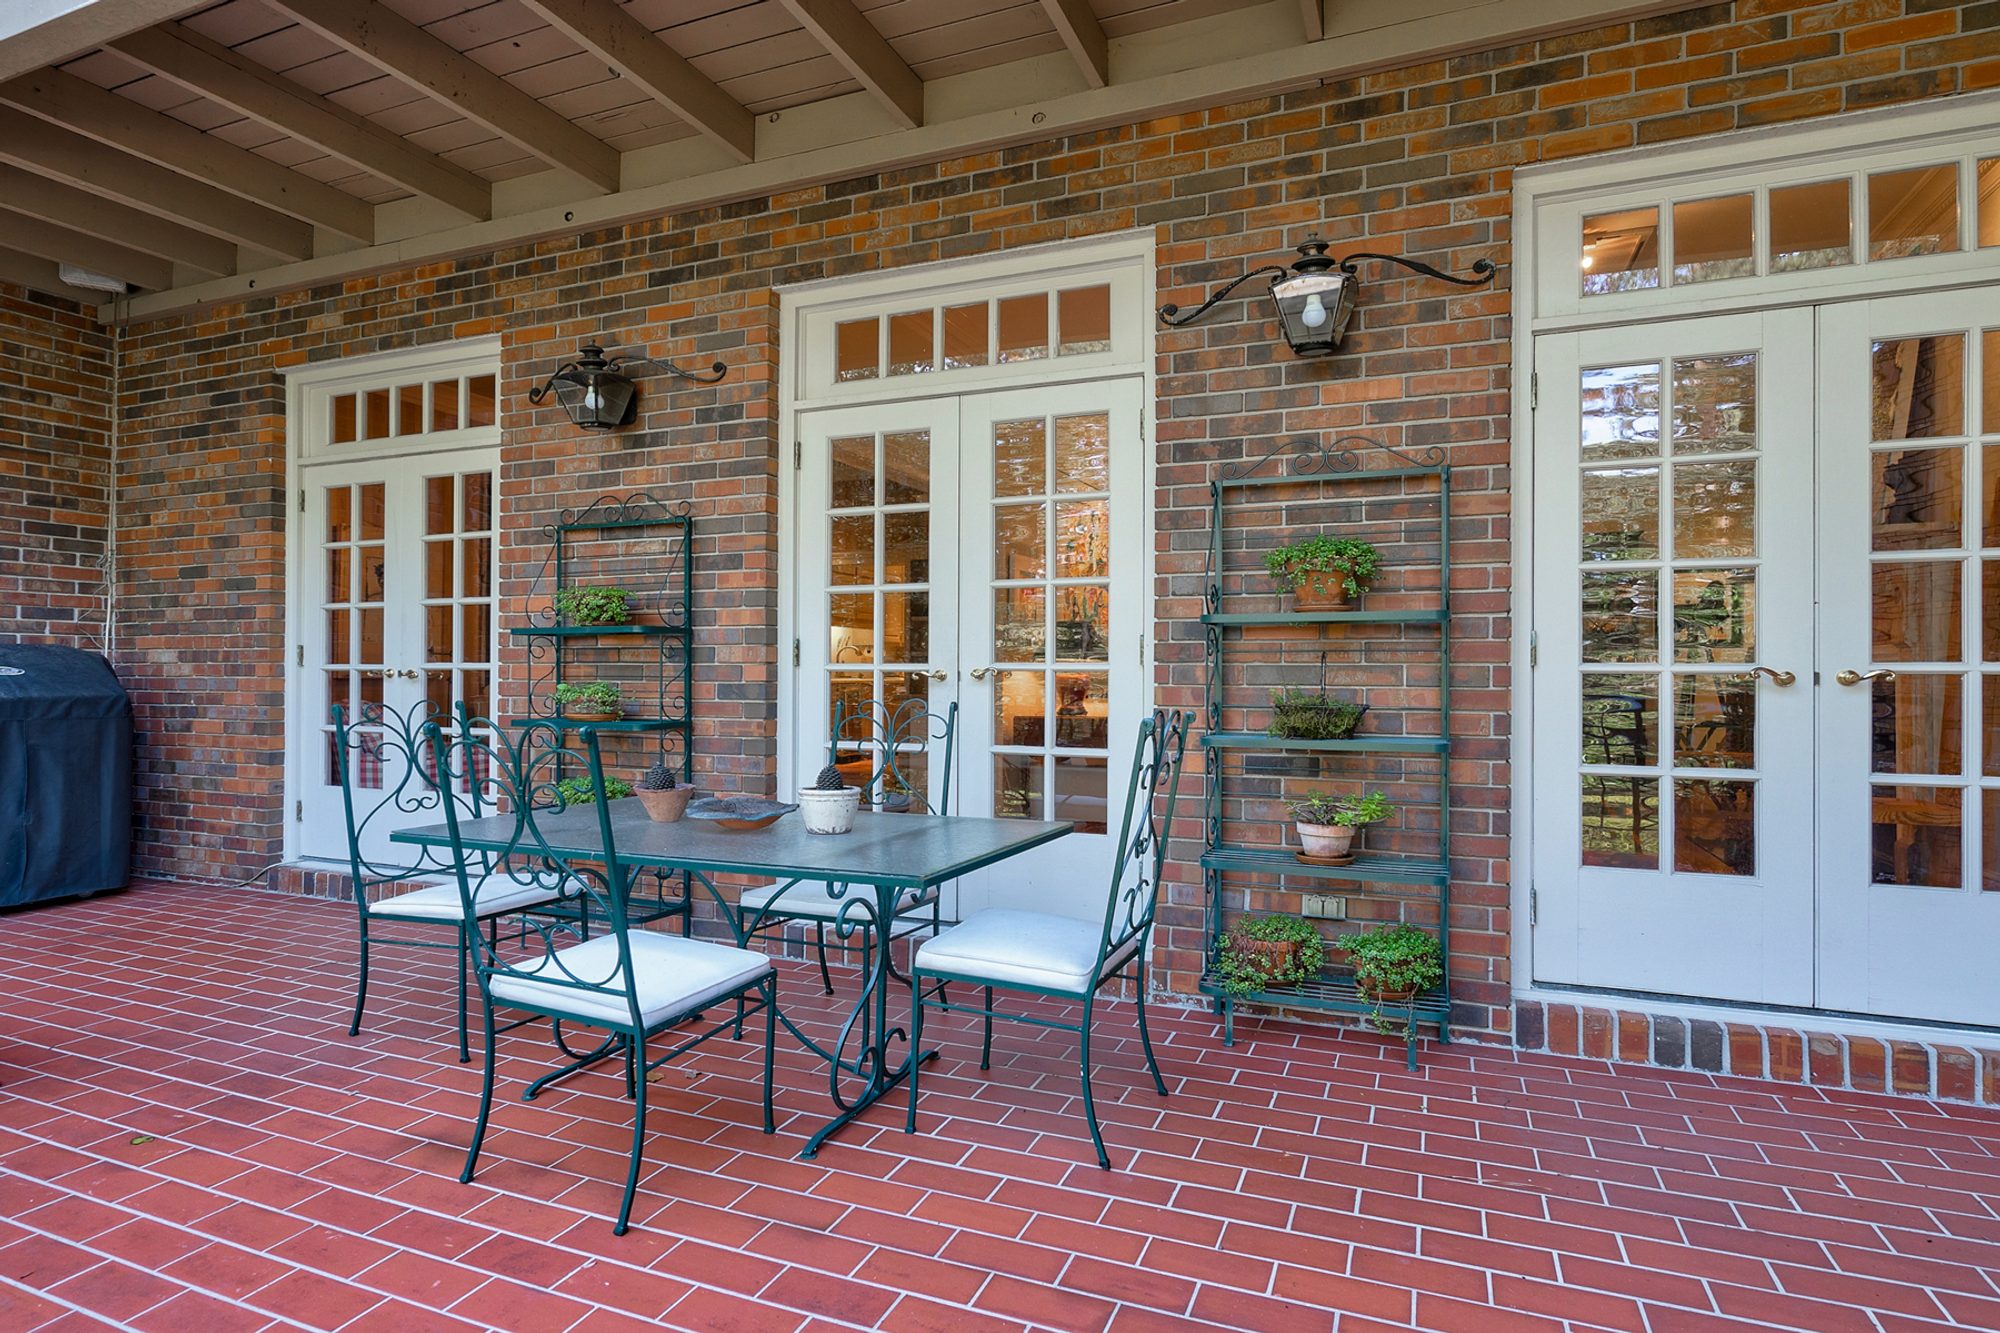 Back patio built with firehouse red red bricks and a super crisp design. Subway style with cement grout.